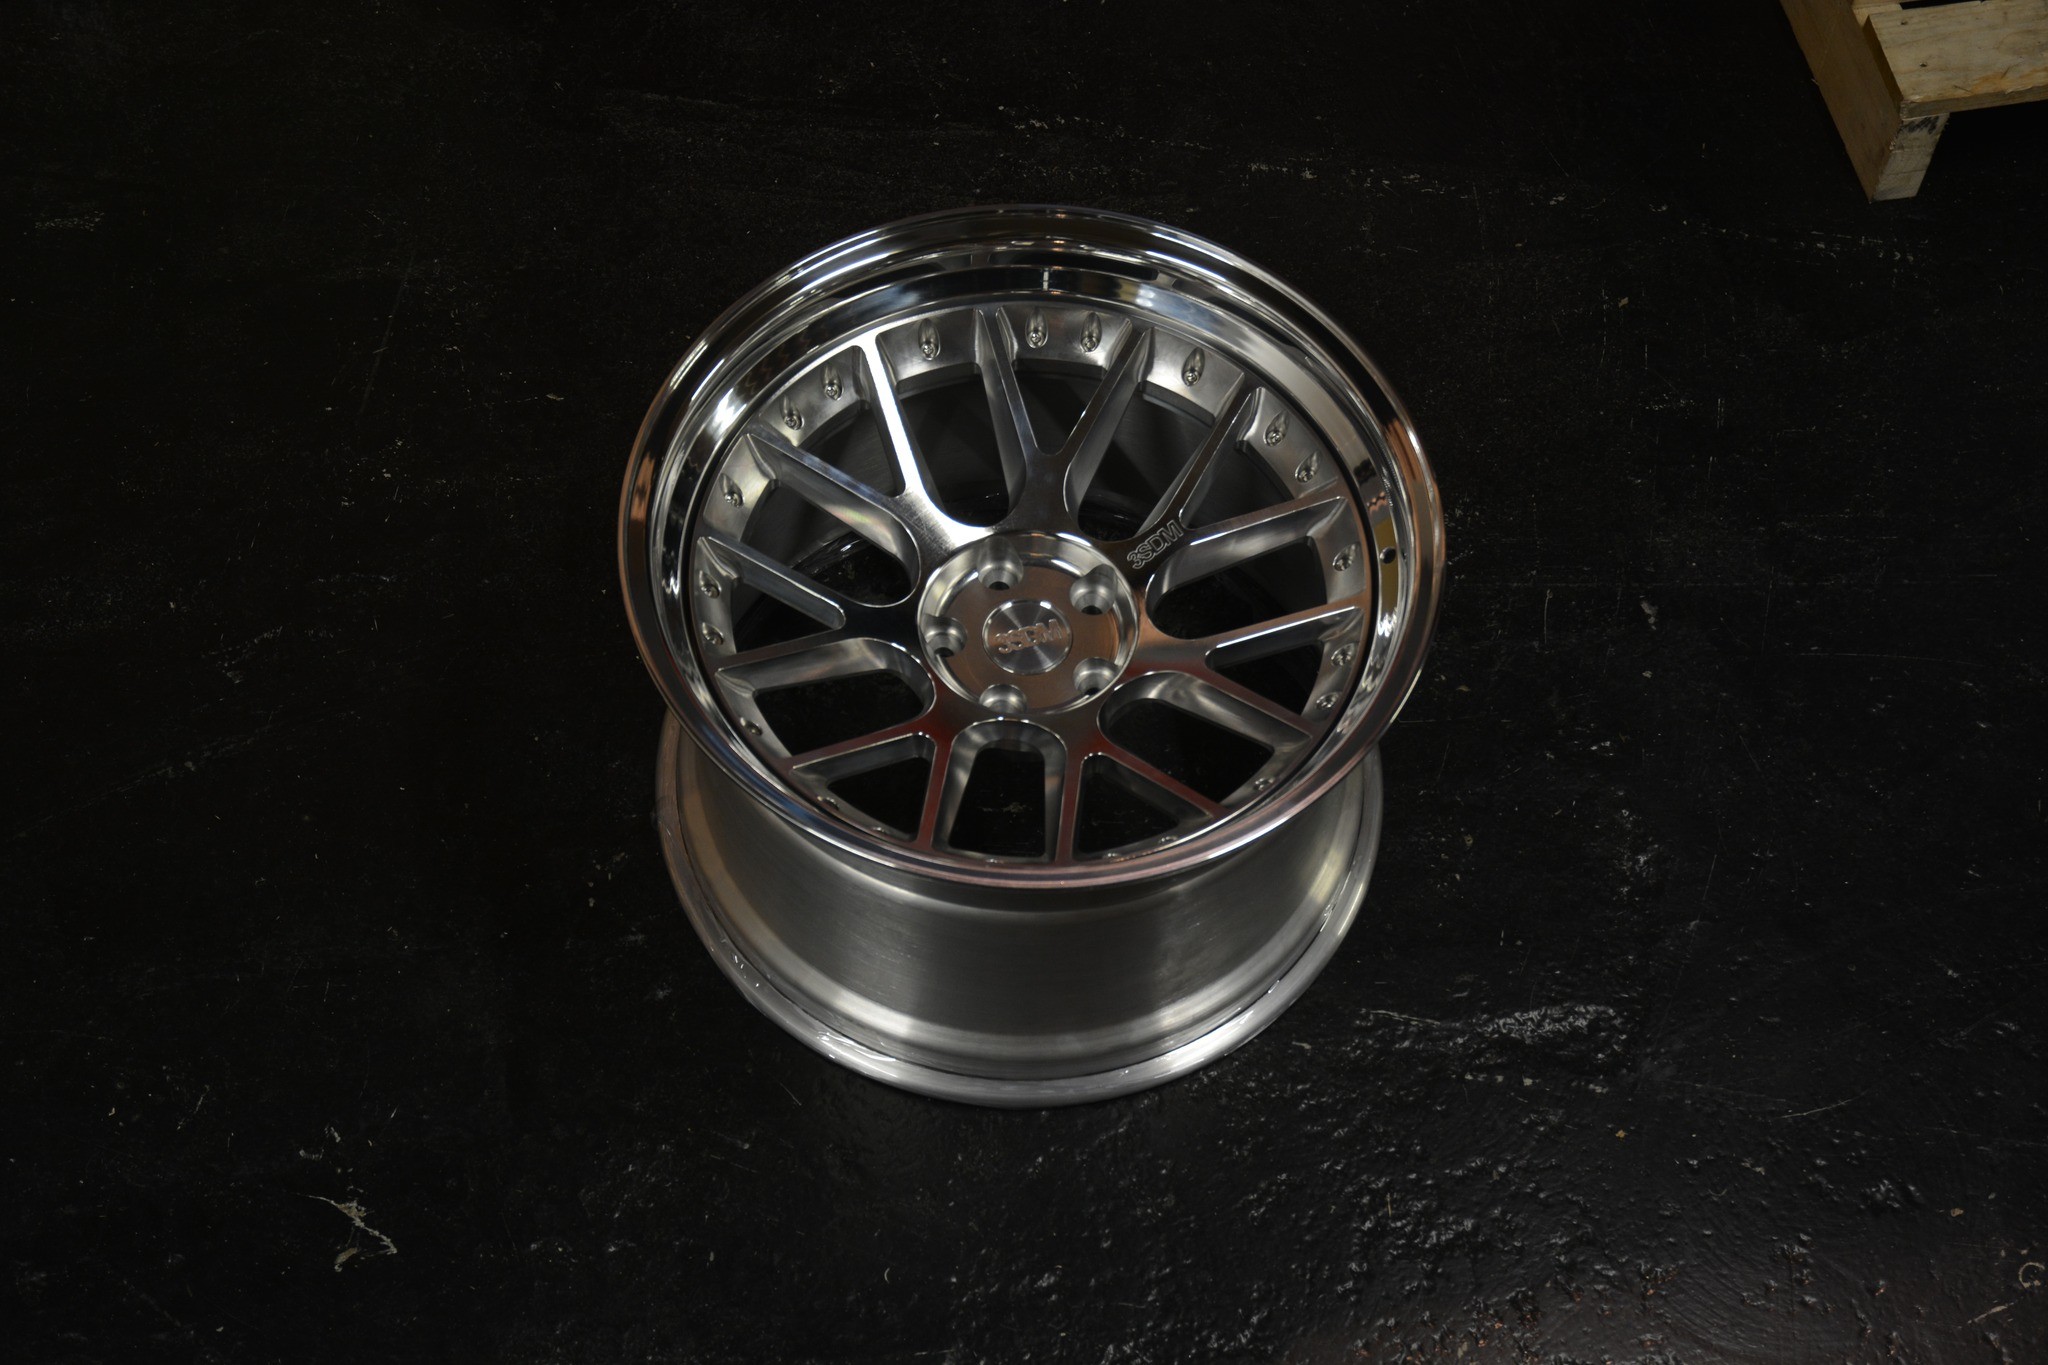 3SDM Custom Forged 3.01 FX1 - Made In The UK | C2yLIg6iMyB